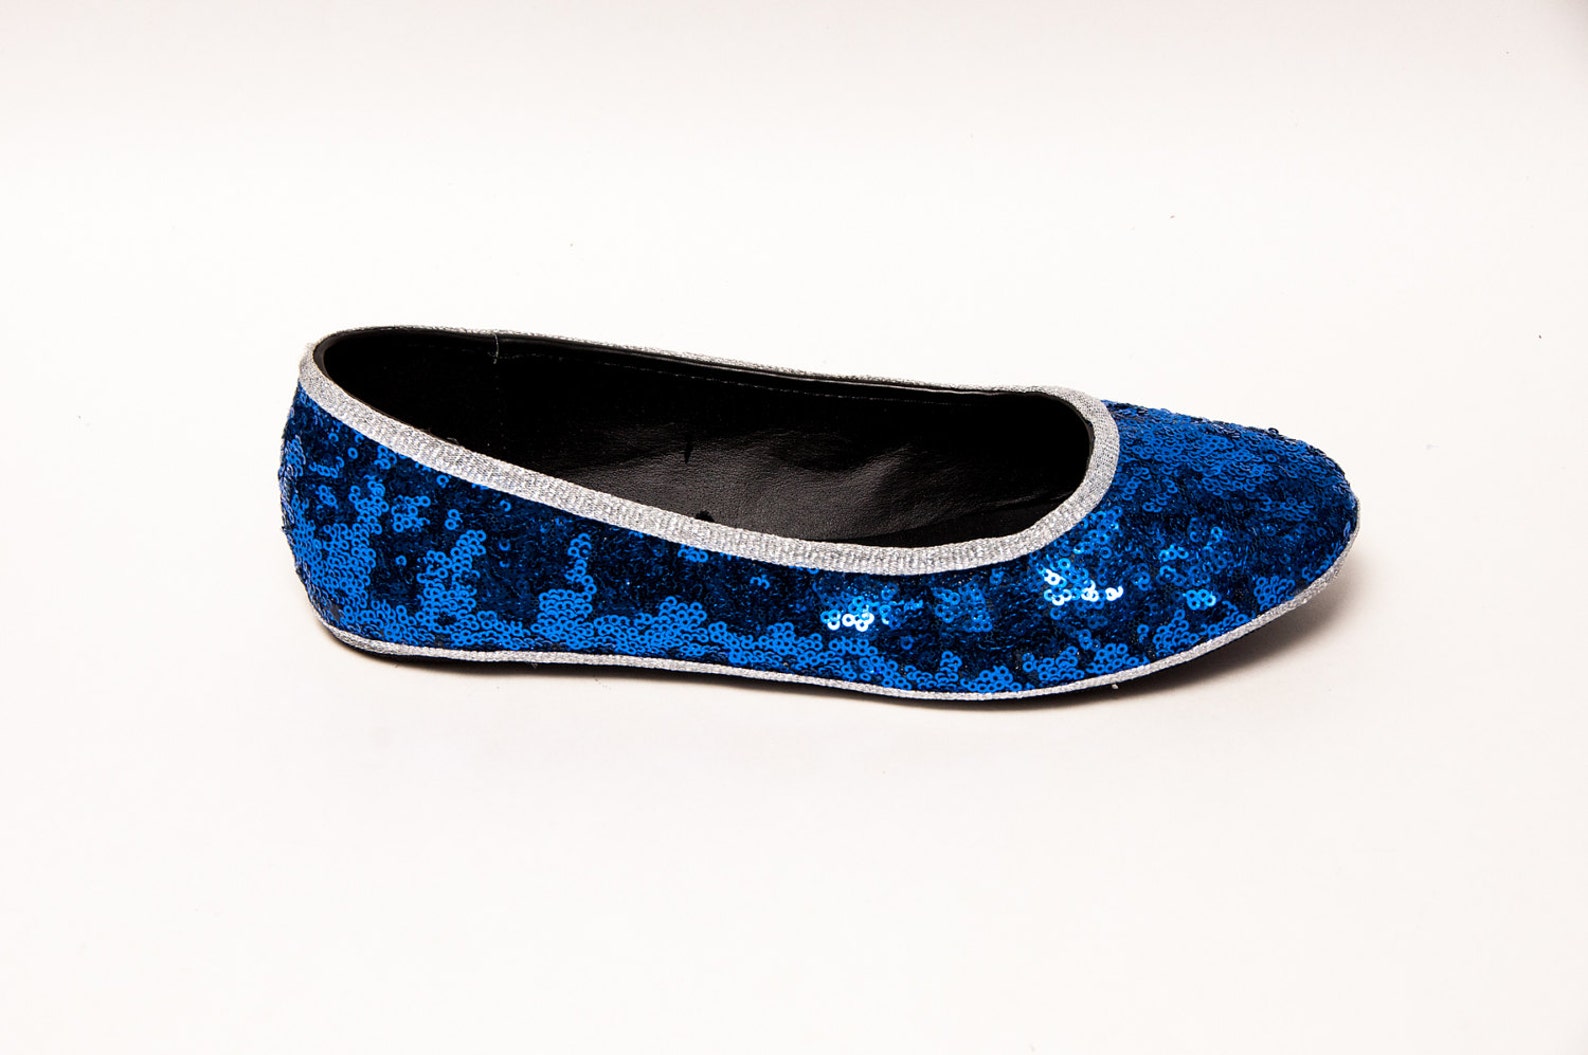 tiny sequin - starlight sapphire blue with silver accent trim custom ballet flats slippers shoes